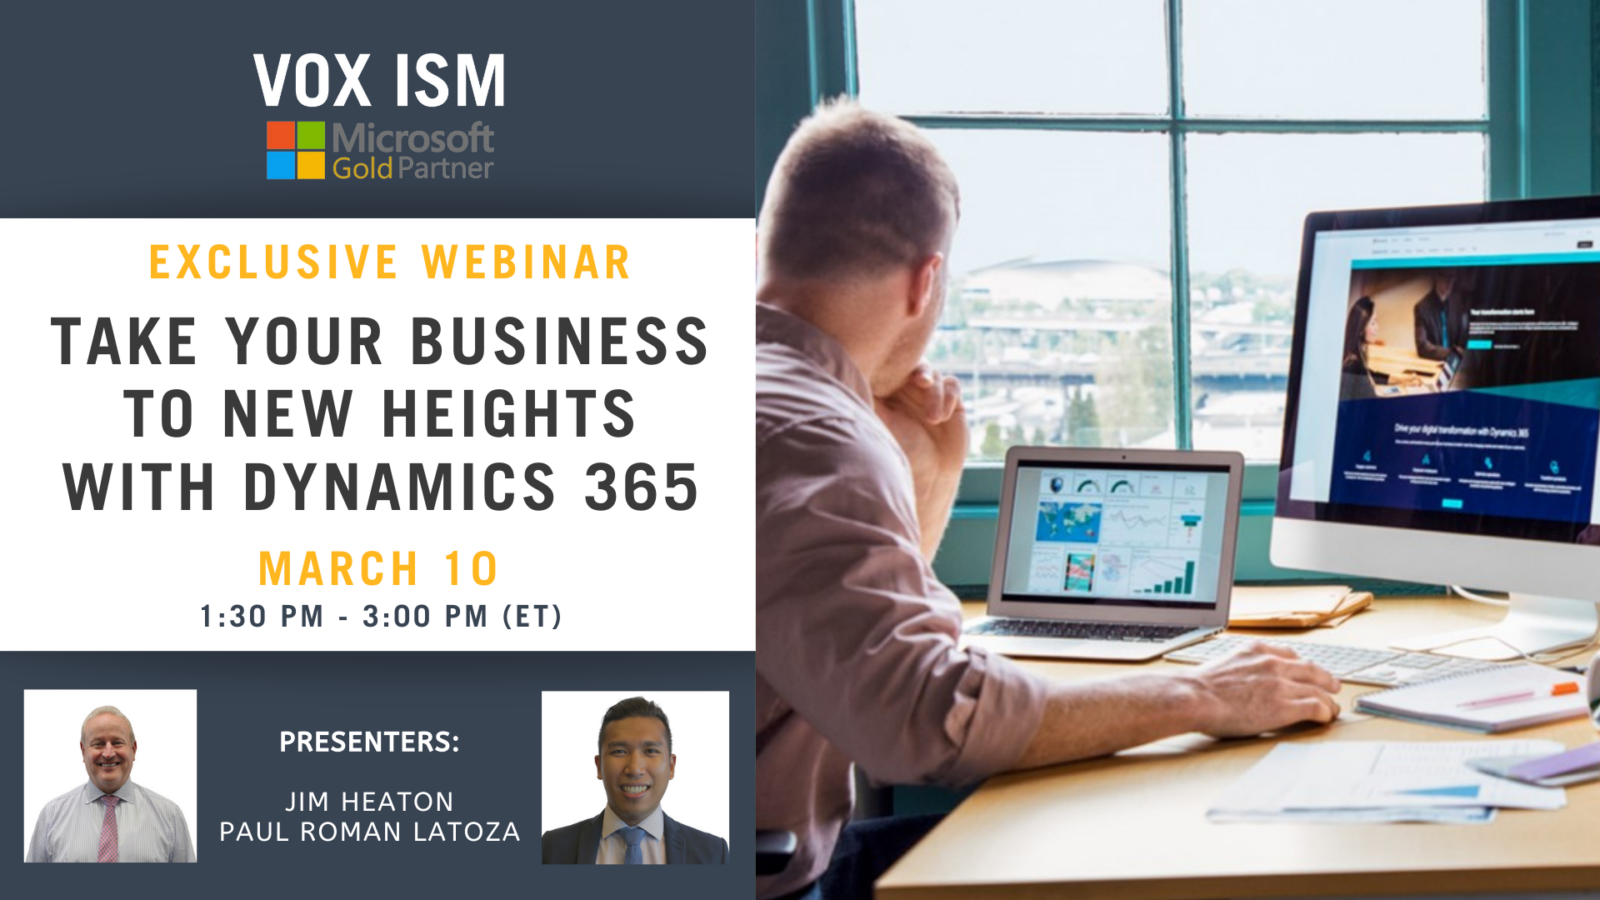 Take your business to new heights with Dynamics 365 - March 10 - Webinar